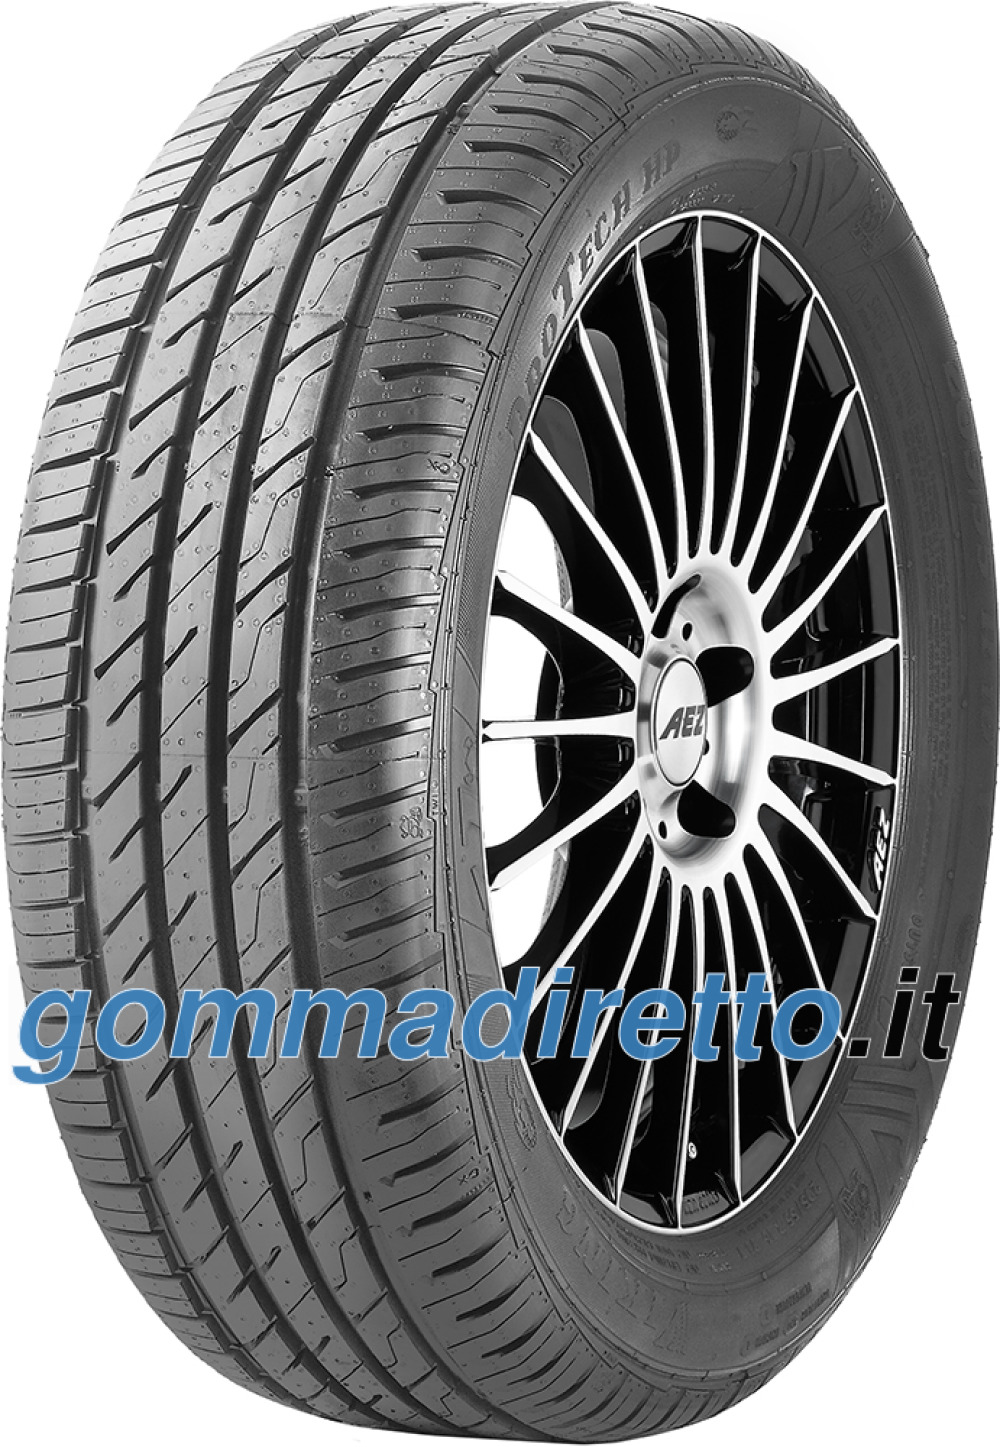 Image of Viking ProTech HP ( 185/55 R14 80H )